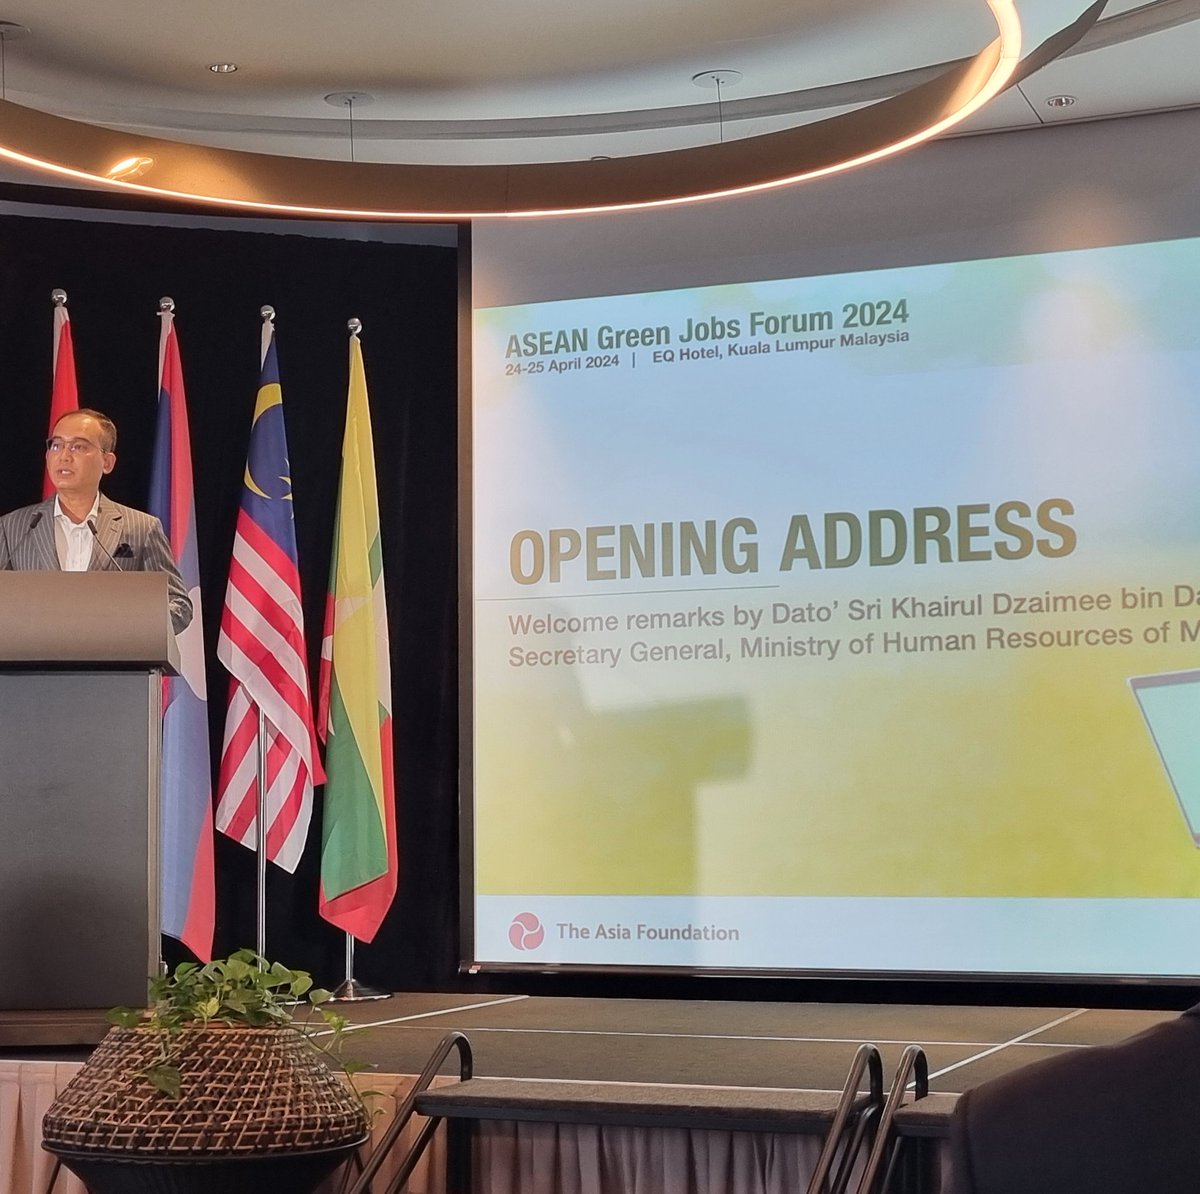 The Secretary General of the Ministry of Human Resources kicks off a 2 day ASEAN Green Jobs Forum today in Kuala Lumpur. @Asia_Foundation is proud to organise the Forum, hosted by the Ministry, the Aus4ASEAN initiative, and the ASEAN Secretariat.